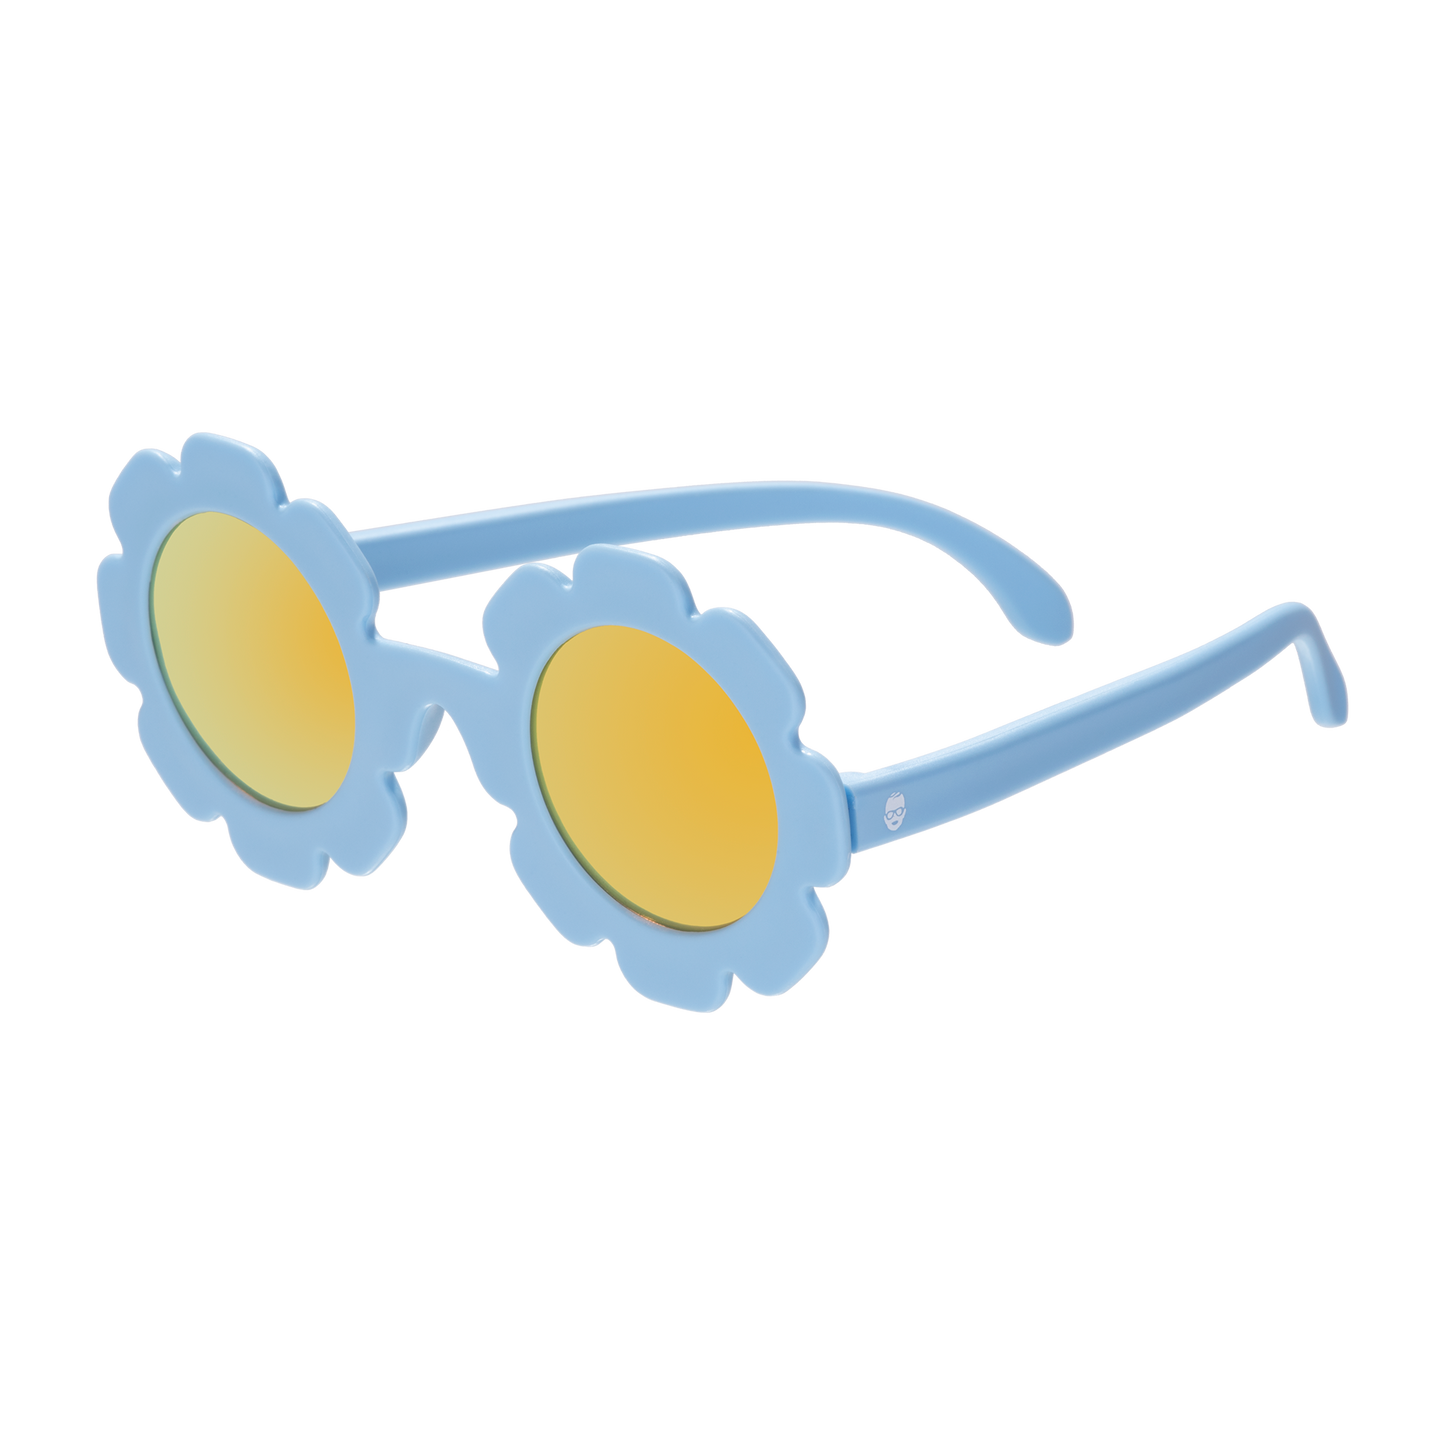 Limited Edition flowers non-polarized mirrored Sunglasses "The Wild Flower"